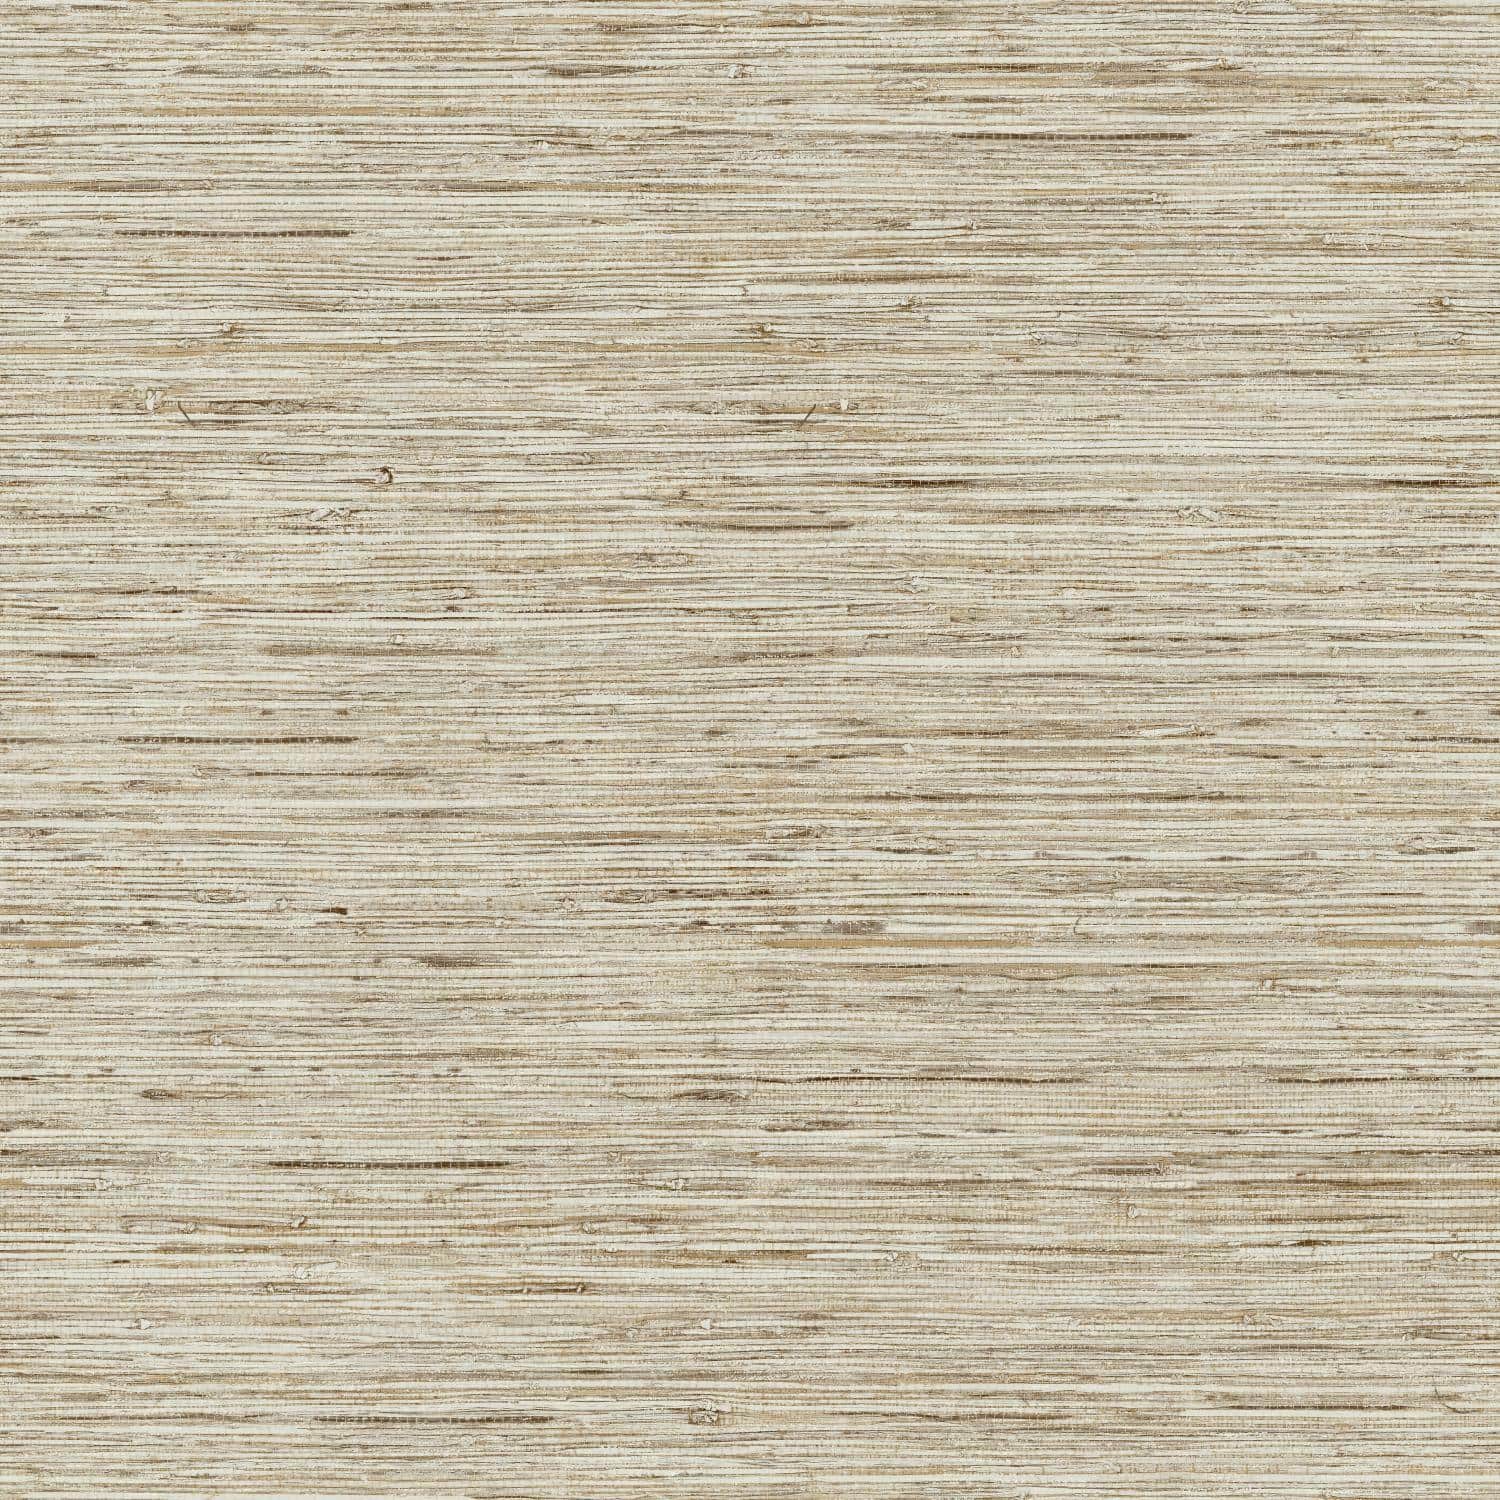 Stacy Garcia Home Faux Grasscloth Peel and Stick Wallpaper  Bed Bath   Beyond  33631933